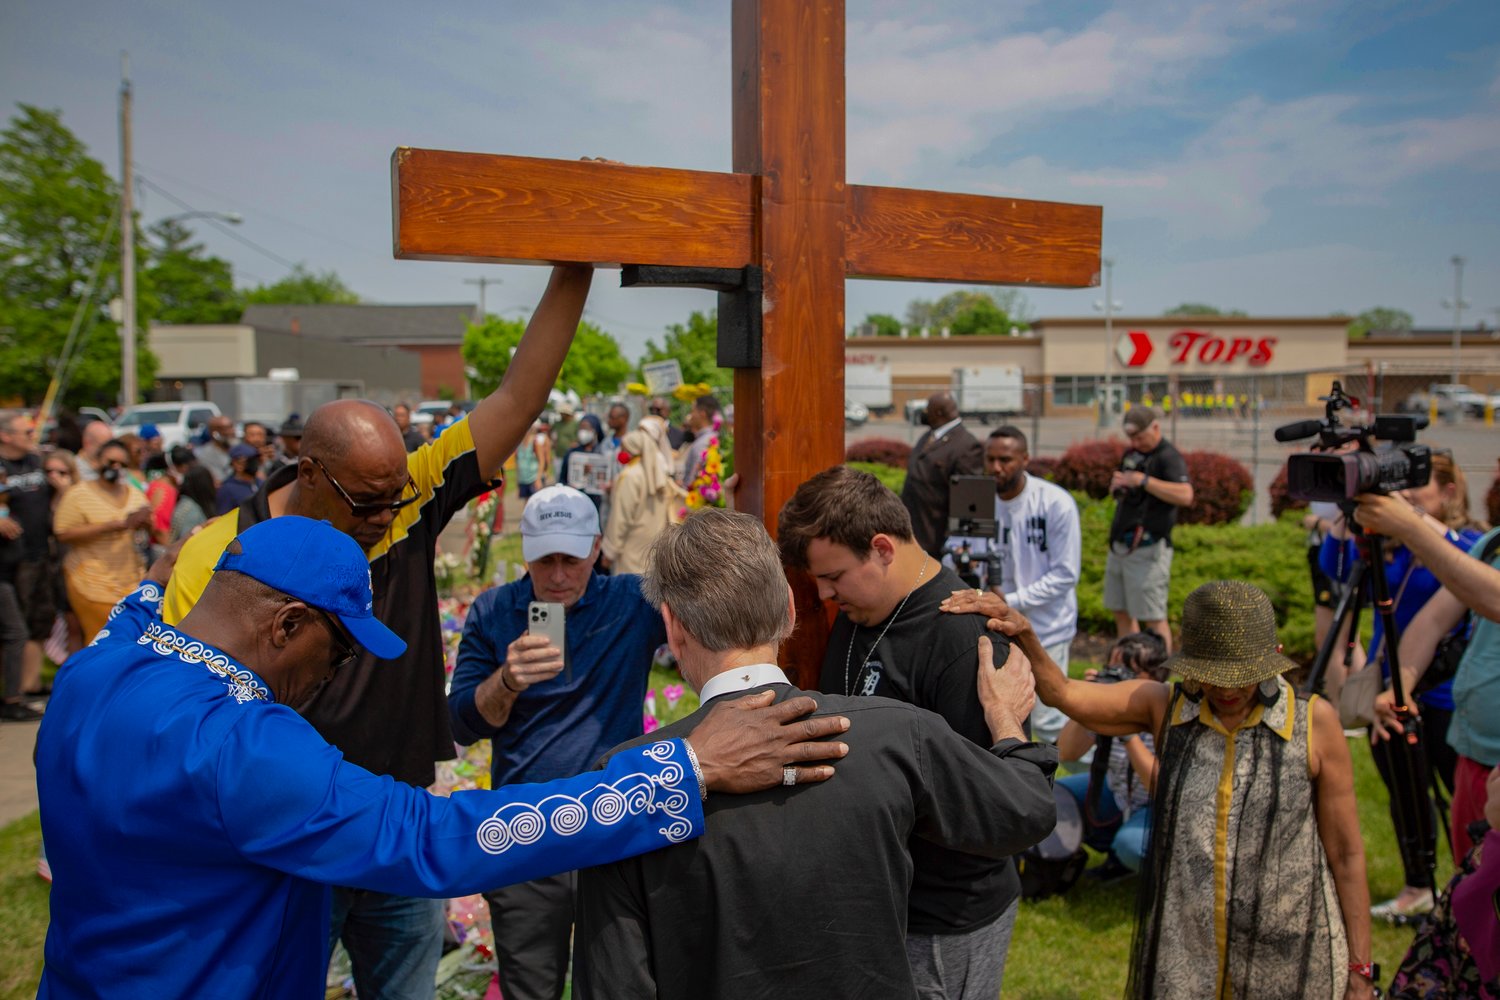 A group prays at the site of a memorial for the victims of the Buffalo supermarket shooting outside the Tops Friendly Market on Saturday in Buffalo.